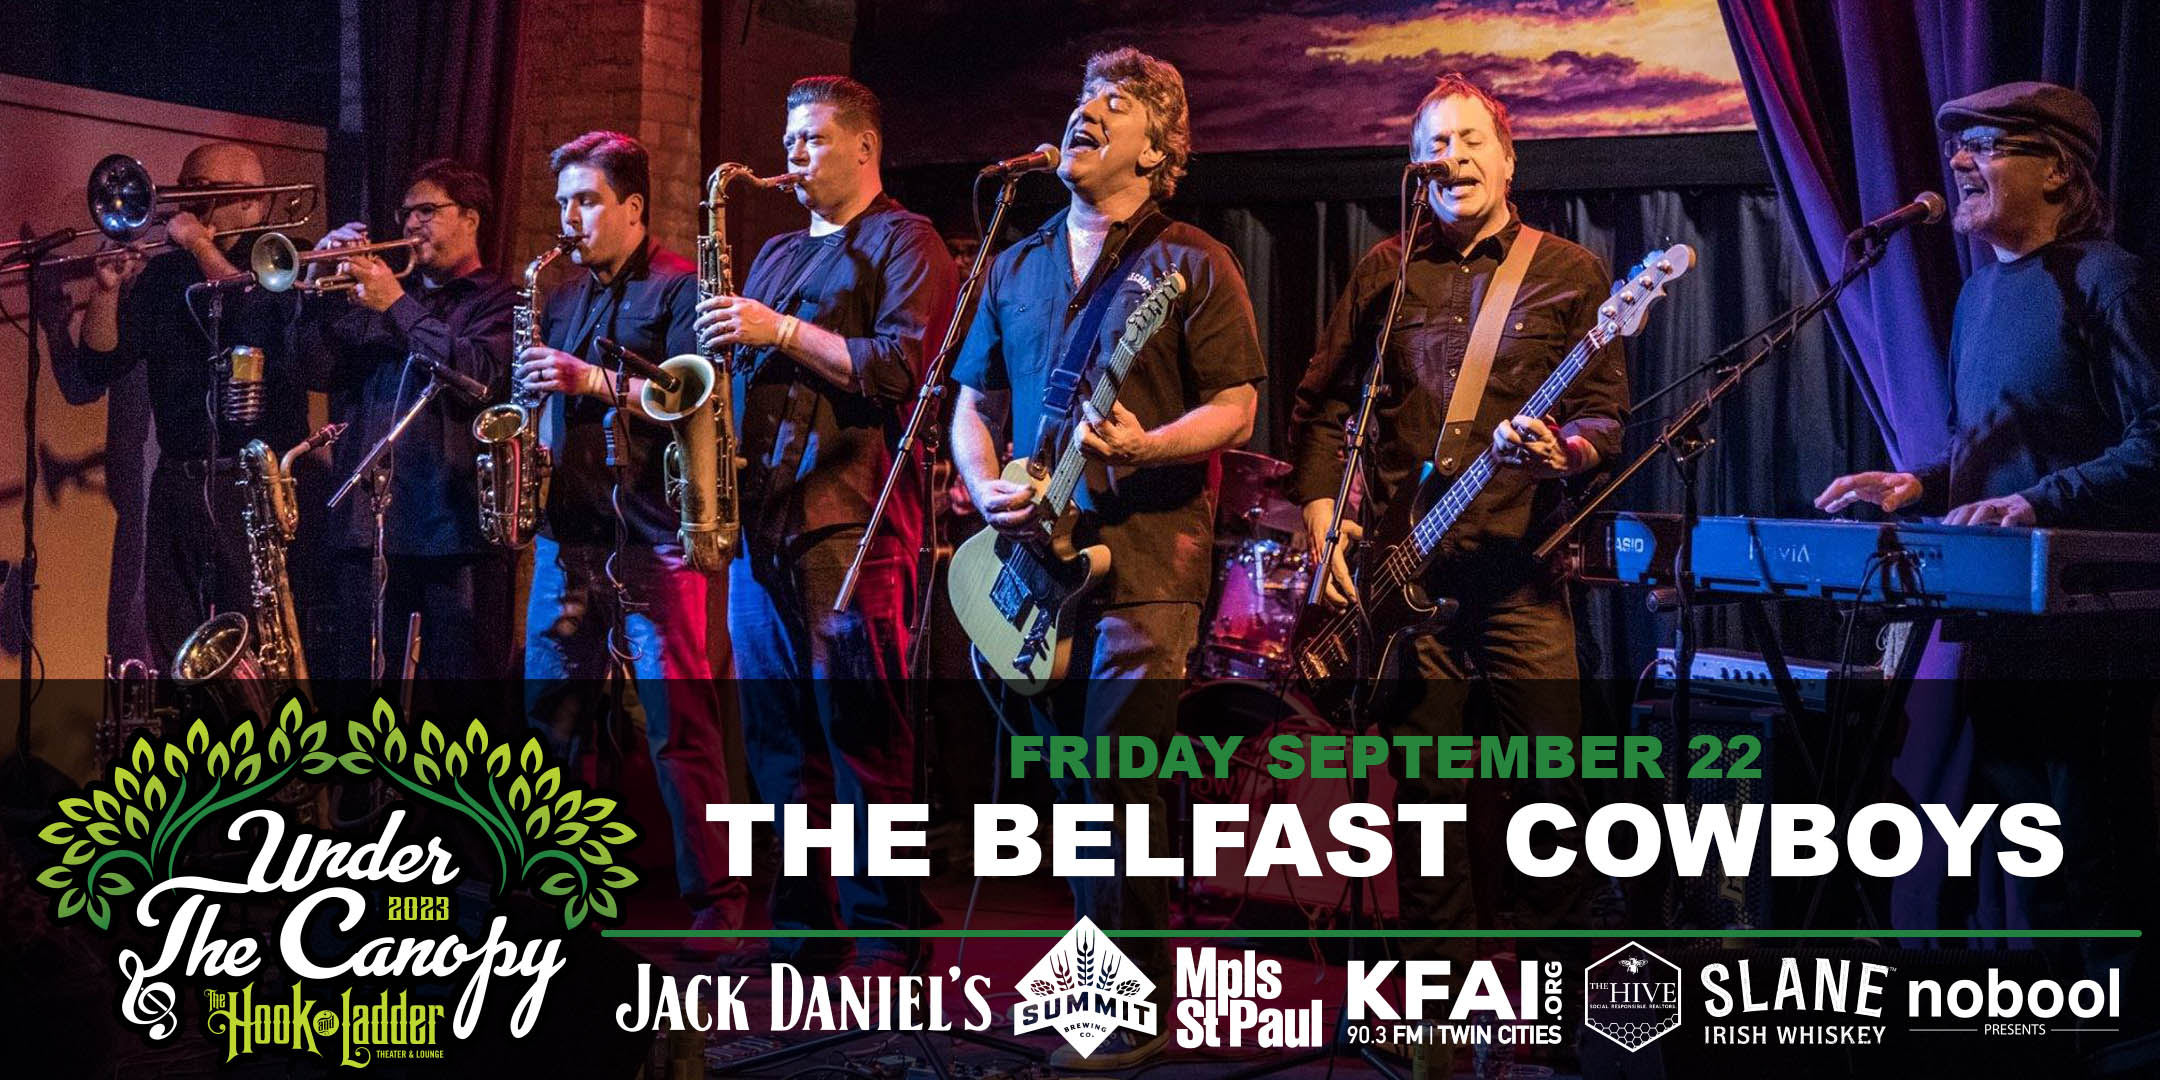 The Belfast Cowboys Friday, September 22, 2023 Under The Canopy at The Hook and Ladder Theater "An Urban Outdoor Summer Concert Series" Doors 6:00pm :: Music 7:00pm :: 21+ Reserved Seats: $30 GA: $15 ADV / $20 DOS *Does not include Fees